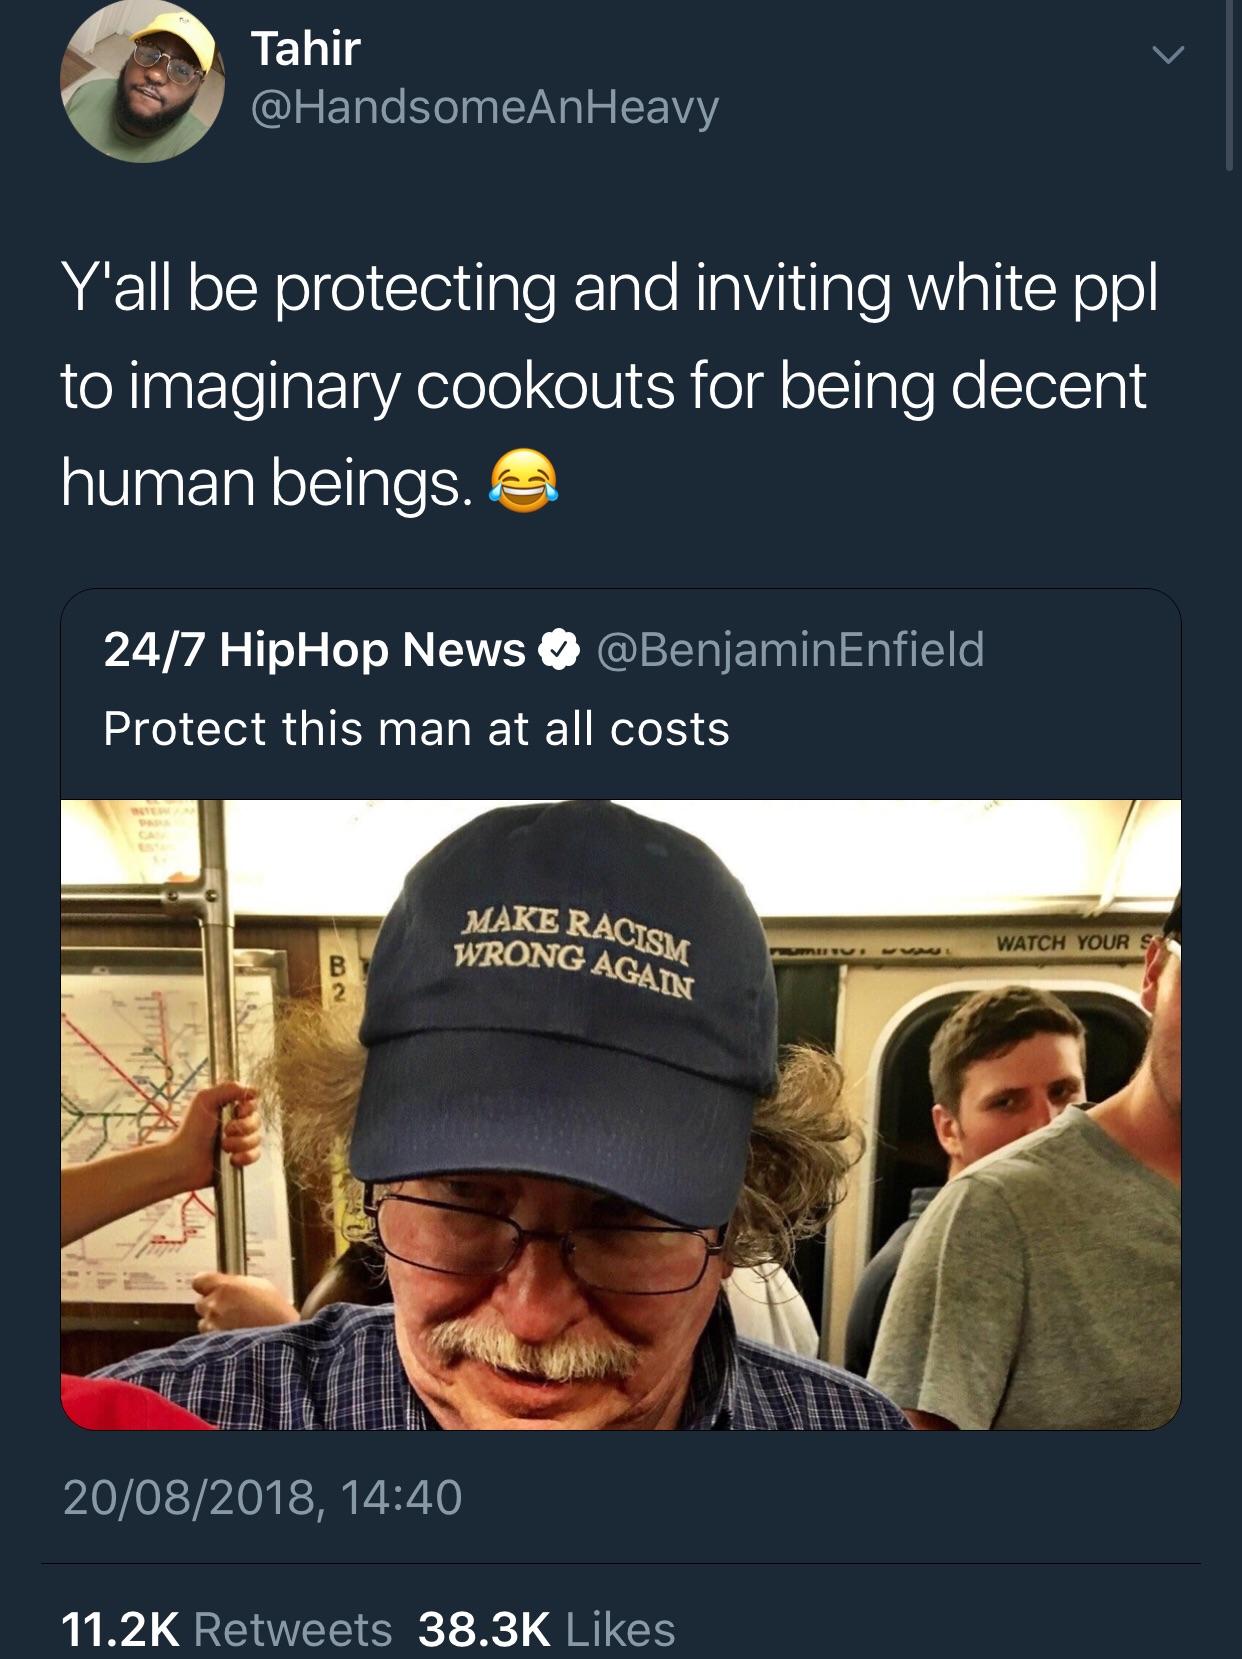 No parades for just being a rational human